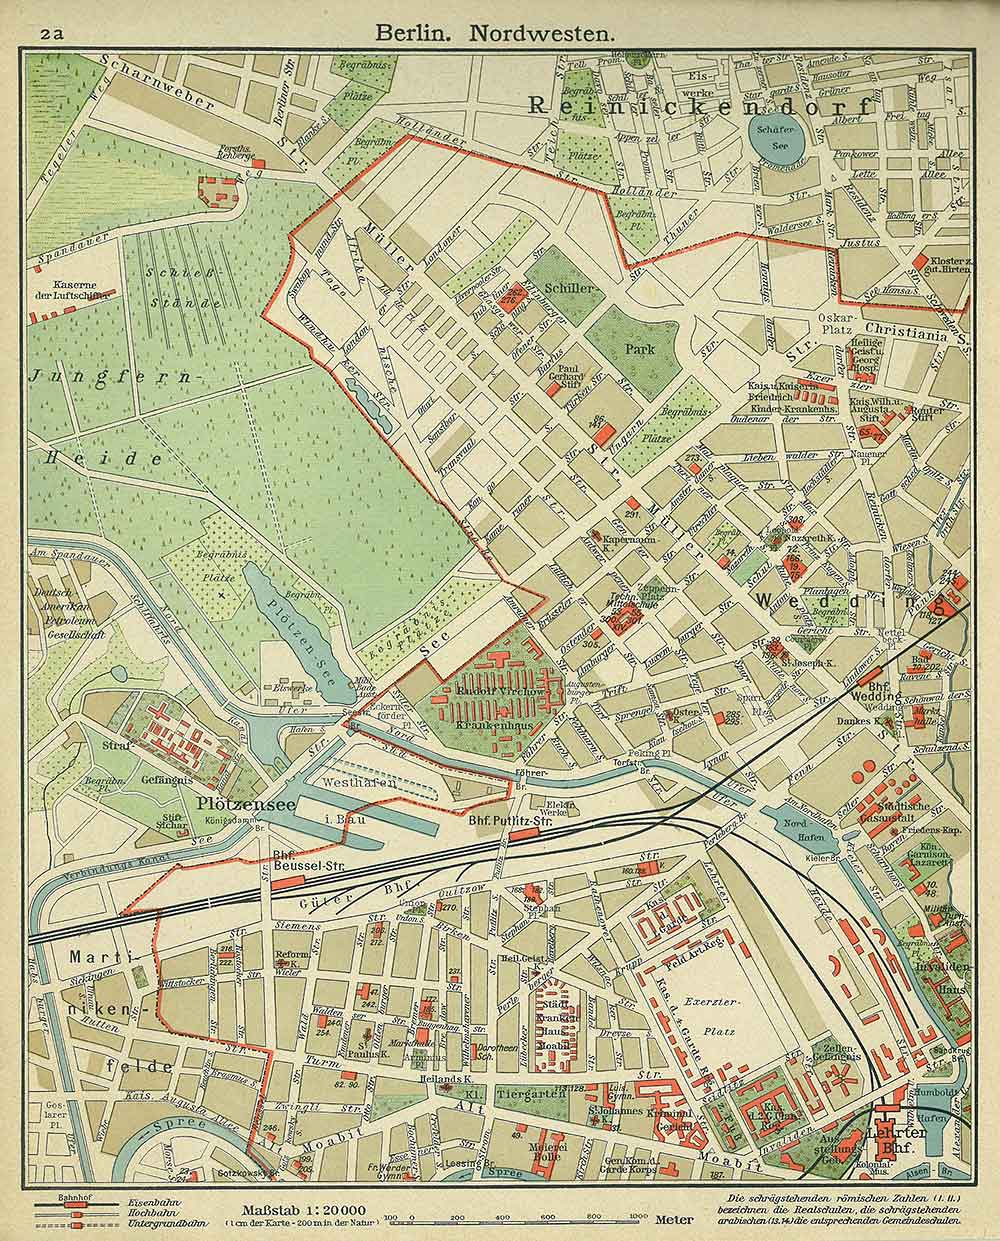 Berlin North-Westwards, Andrees 'Berliner Schul-Atlas', 1916, page 2a, published size to print borders 21.12 cm wide by 26.65 cm high.